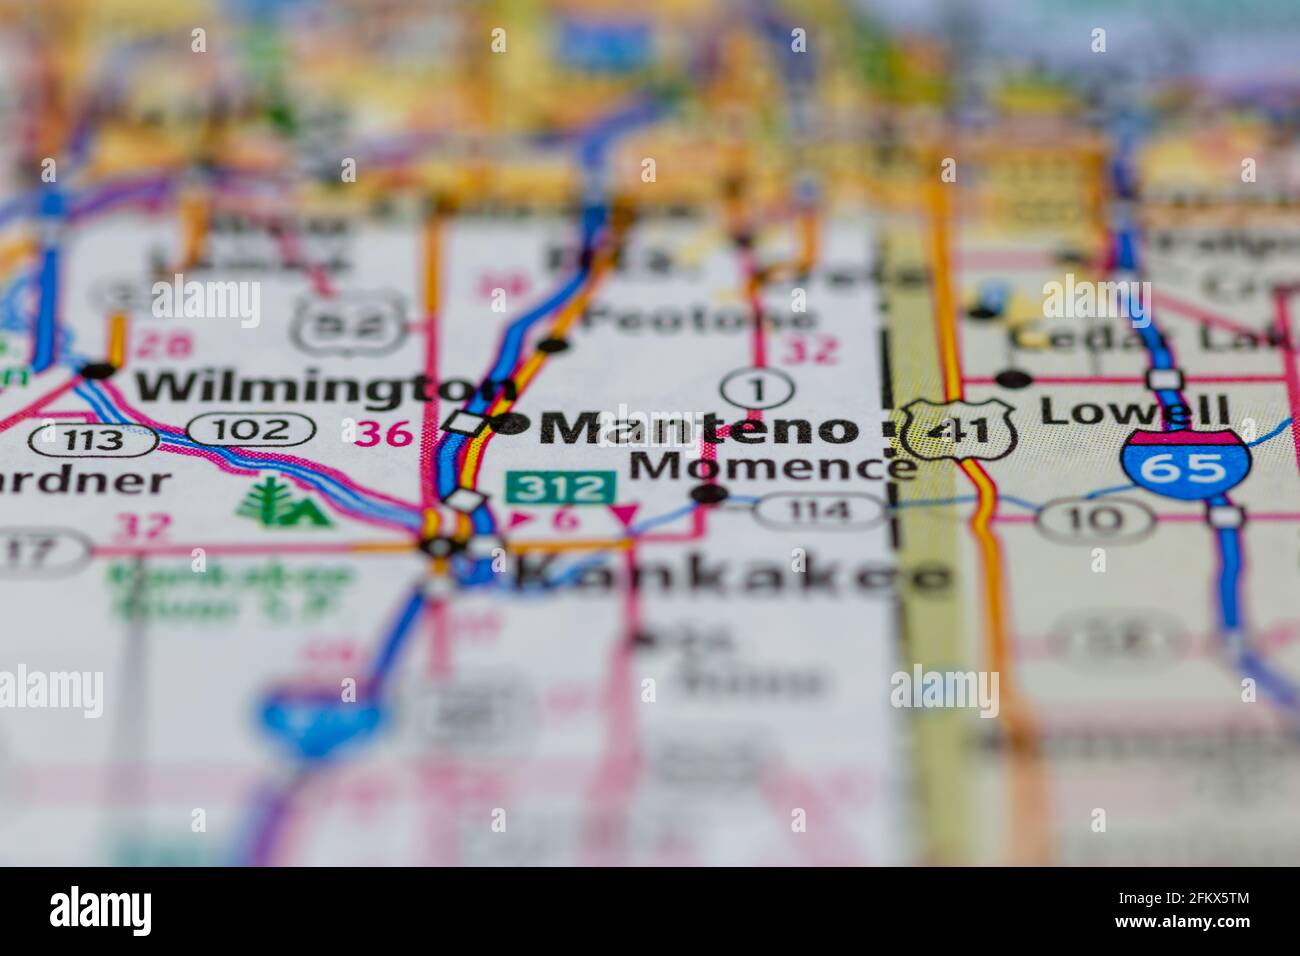 Manteno Illinois Shown on a Geography map or road map Stock Photo